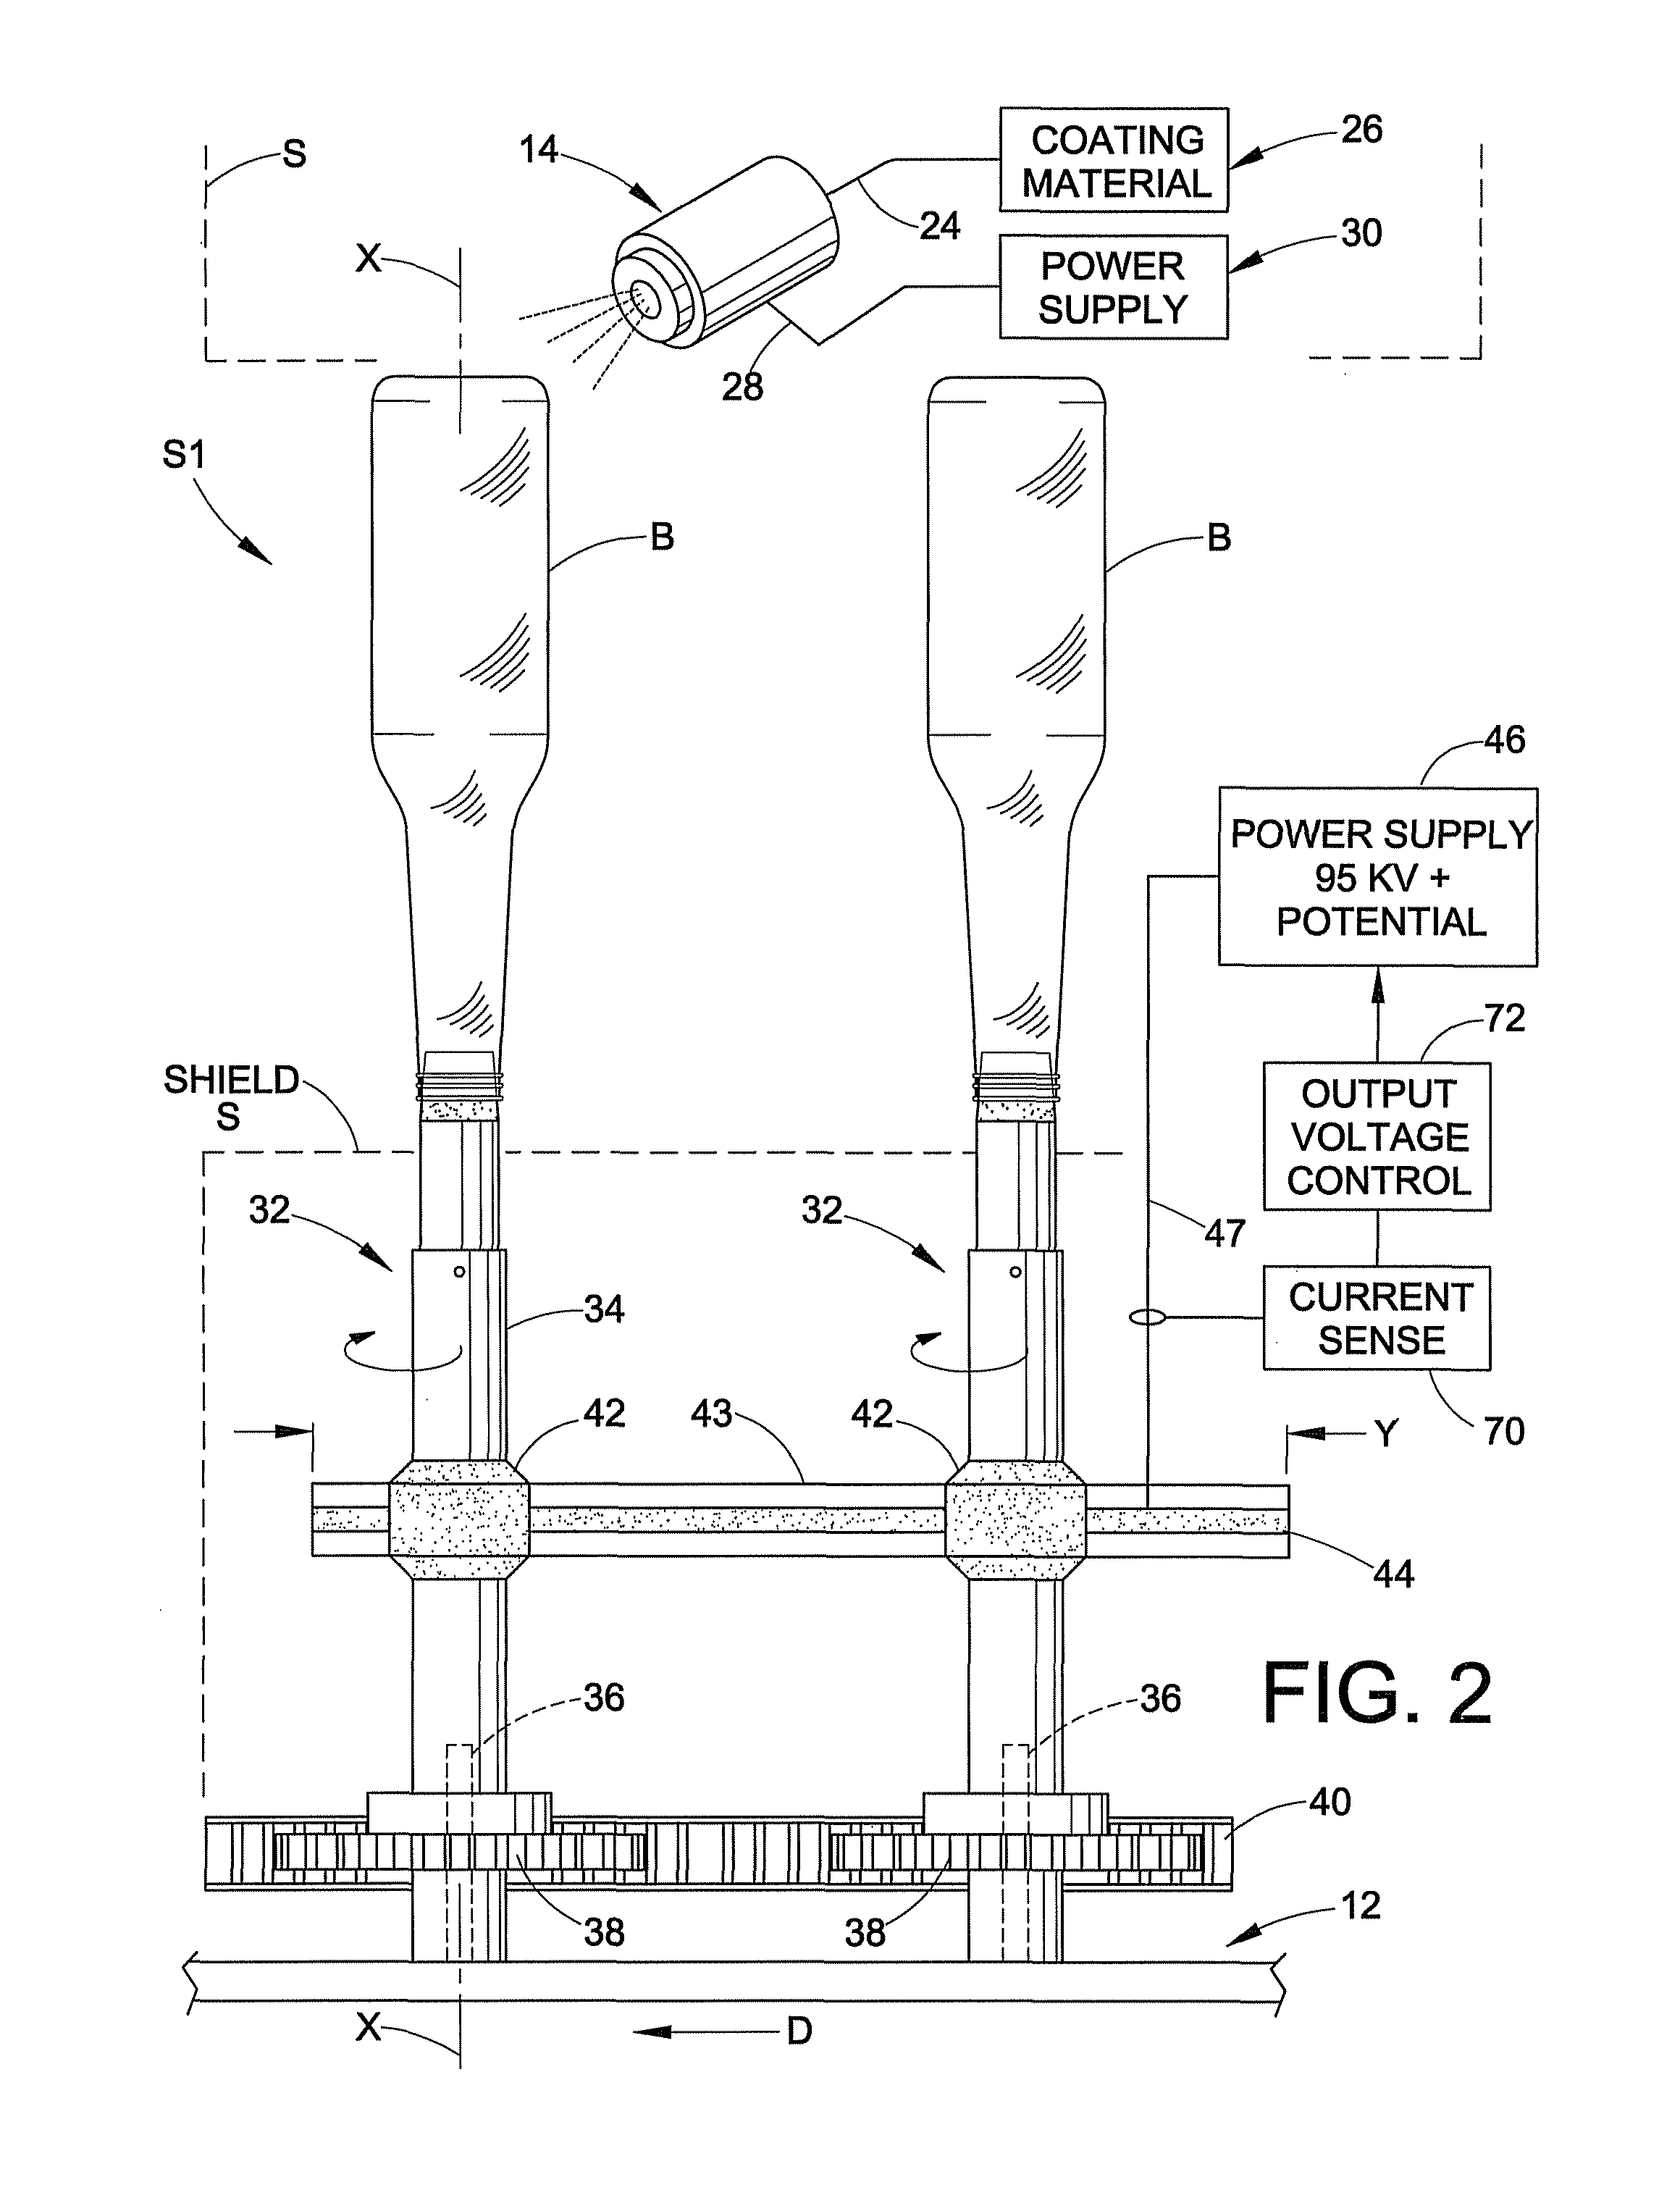 Low capacitance container coating system and method